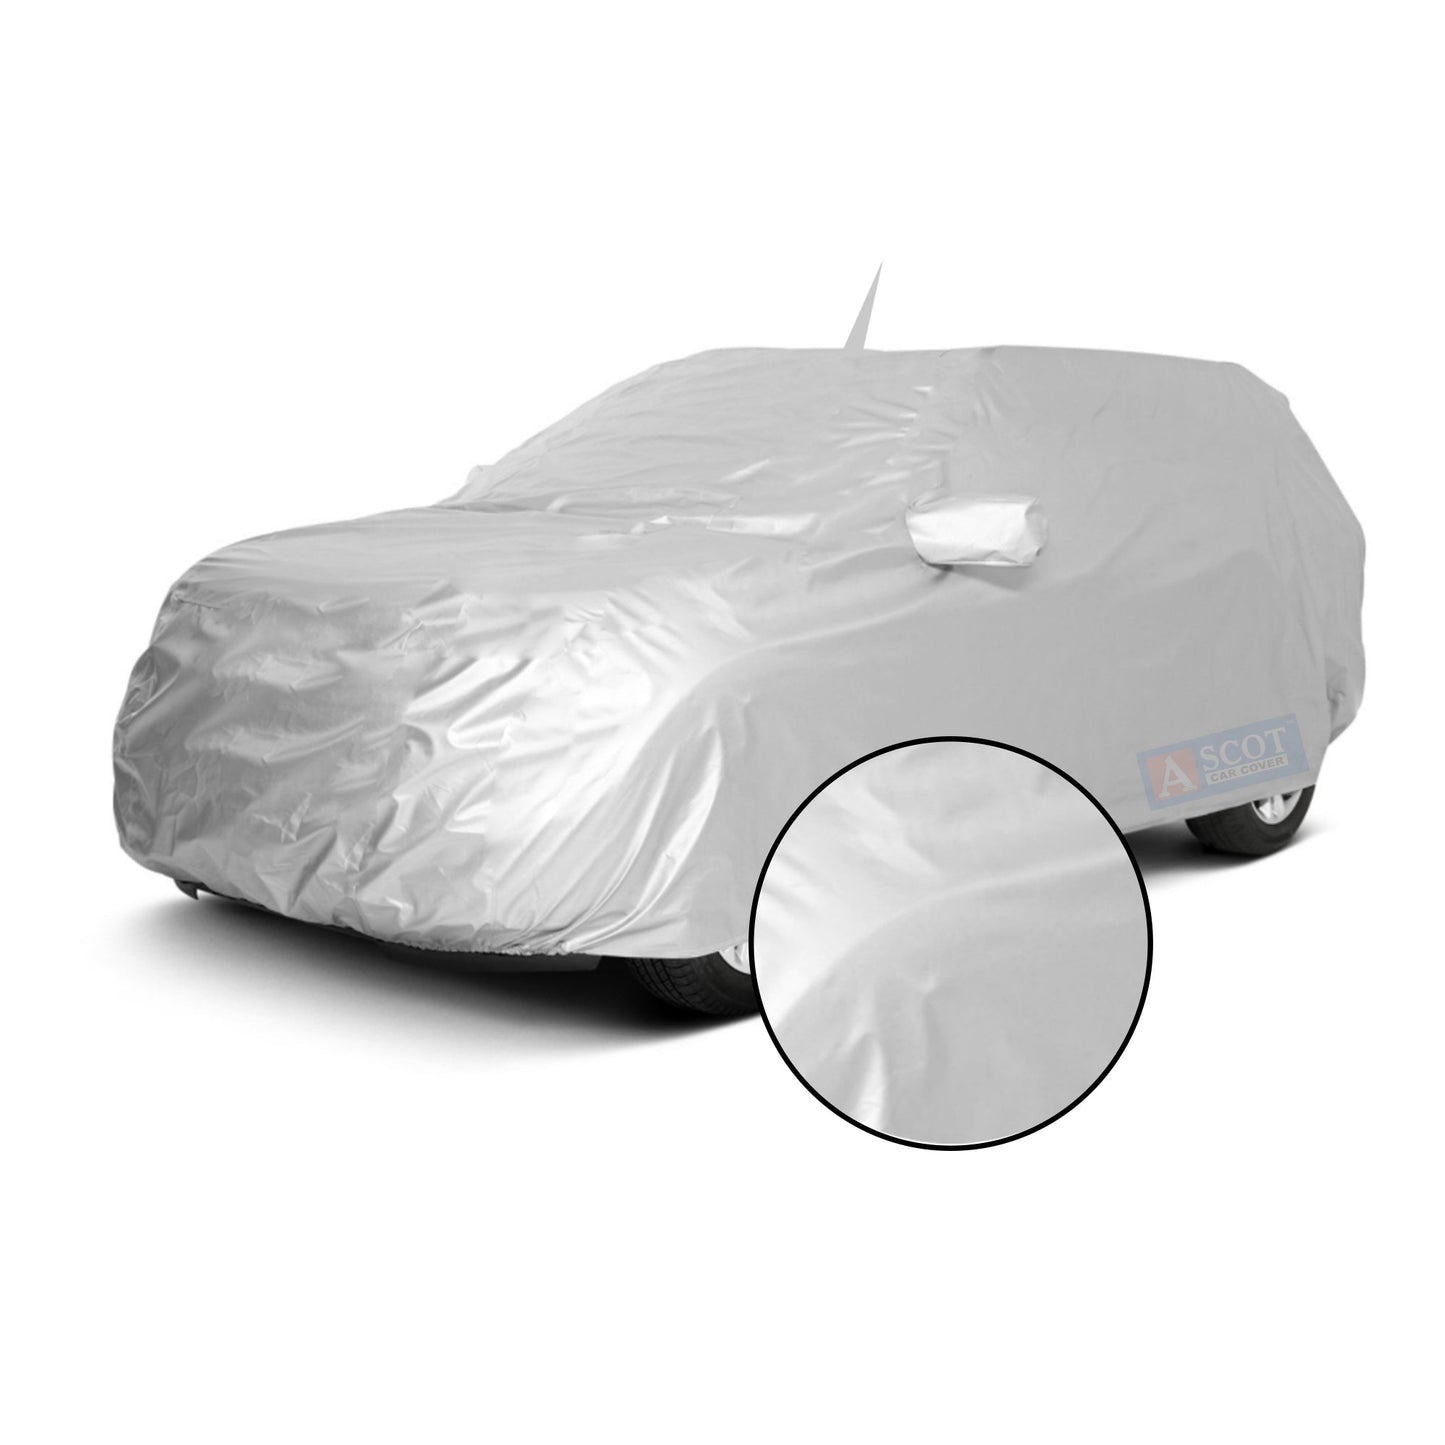 Ascot Hyundai Xcent Prime Car Body Cover Dust Proof, Trippel Stitched